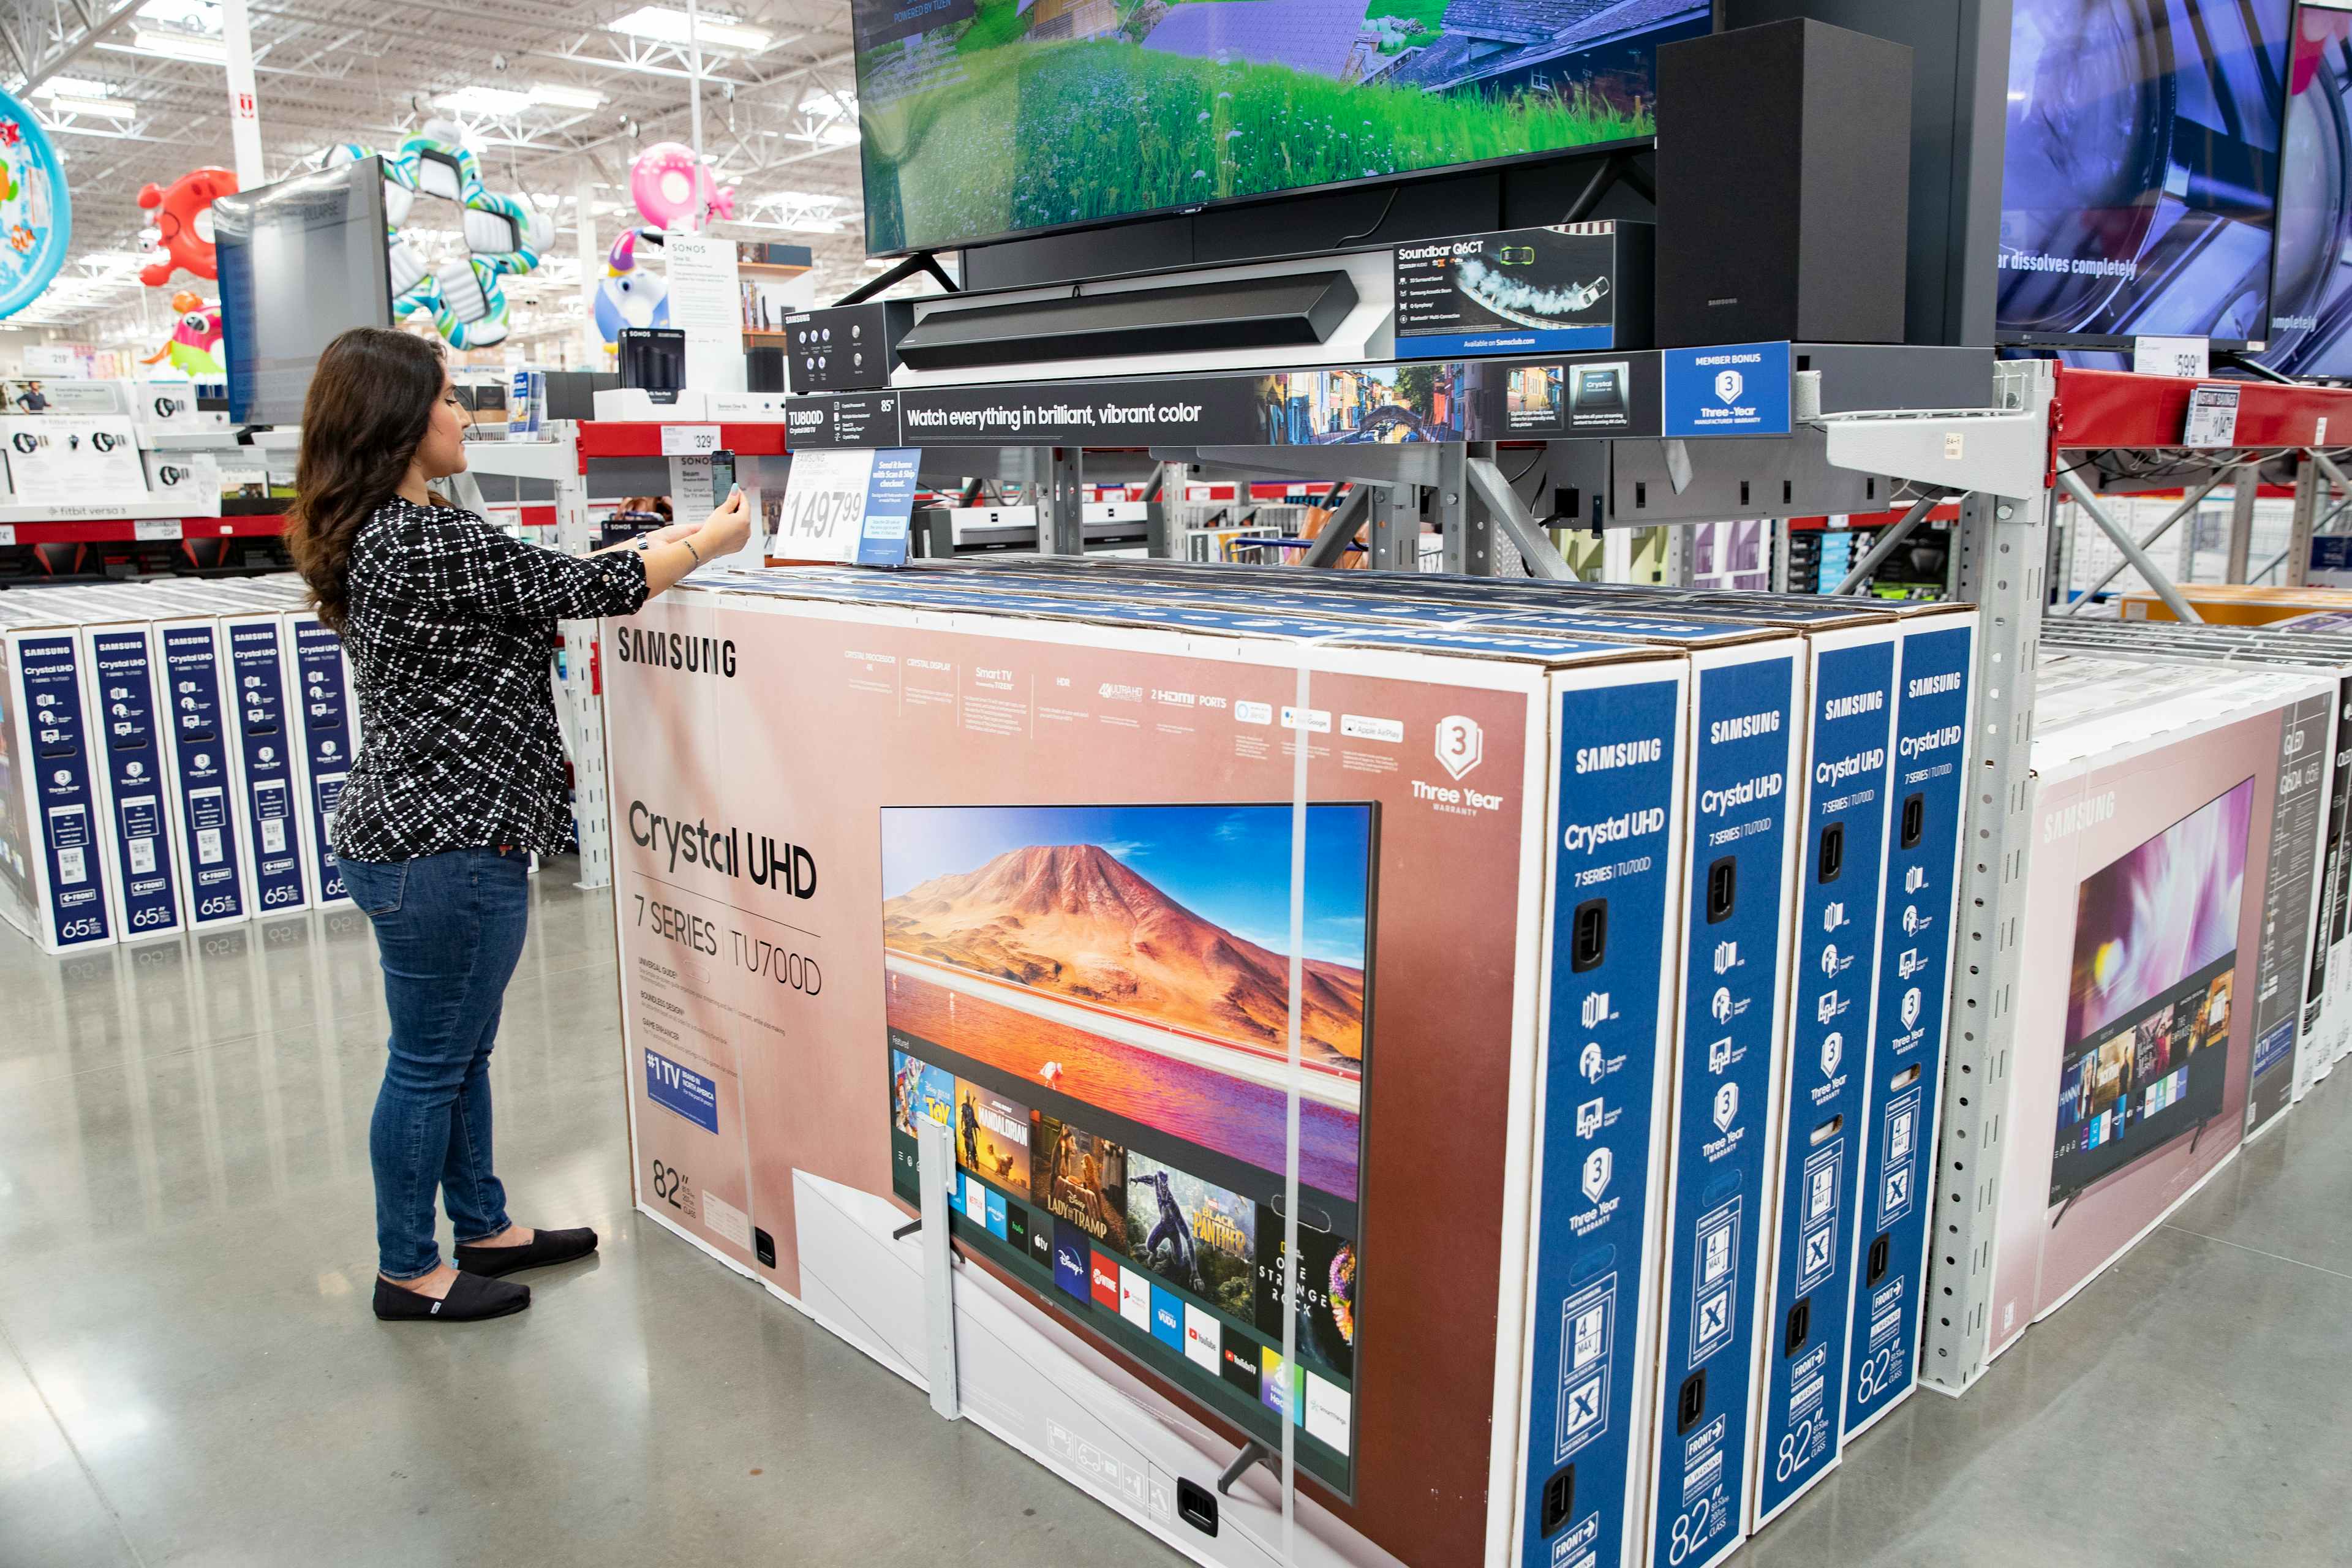 A Sam's Club member shopping for TVs in the electronics section at Sam's Club.